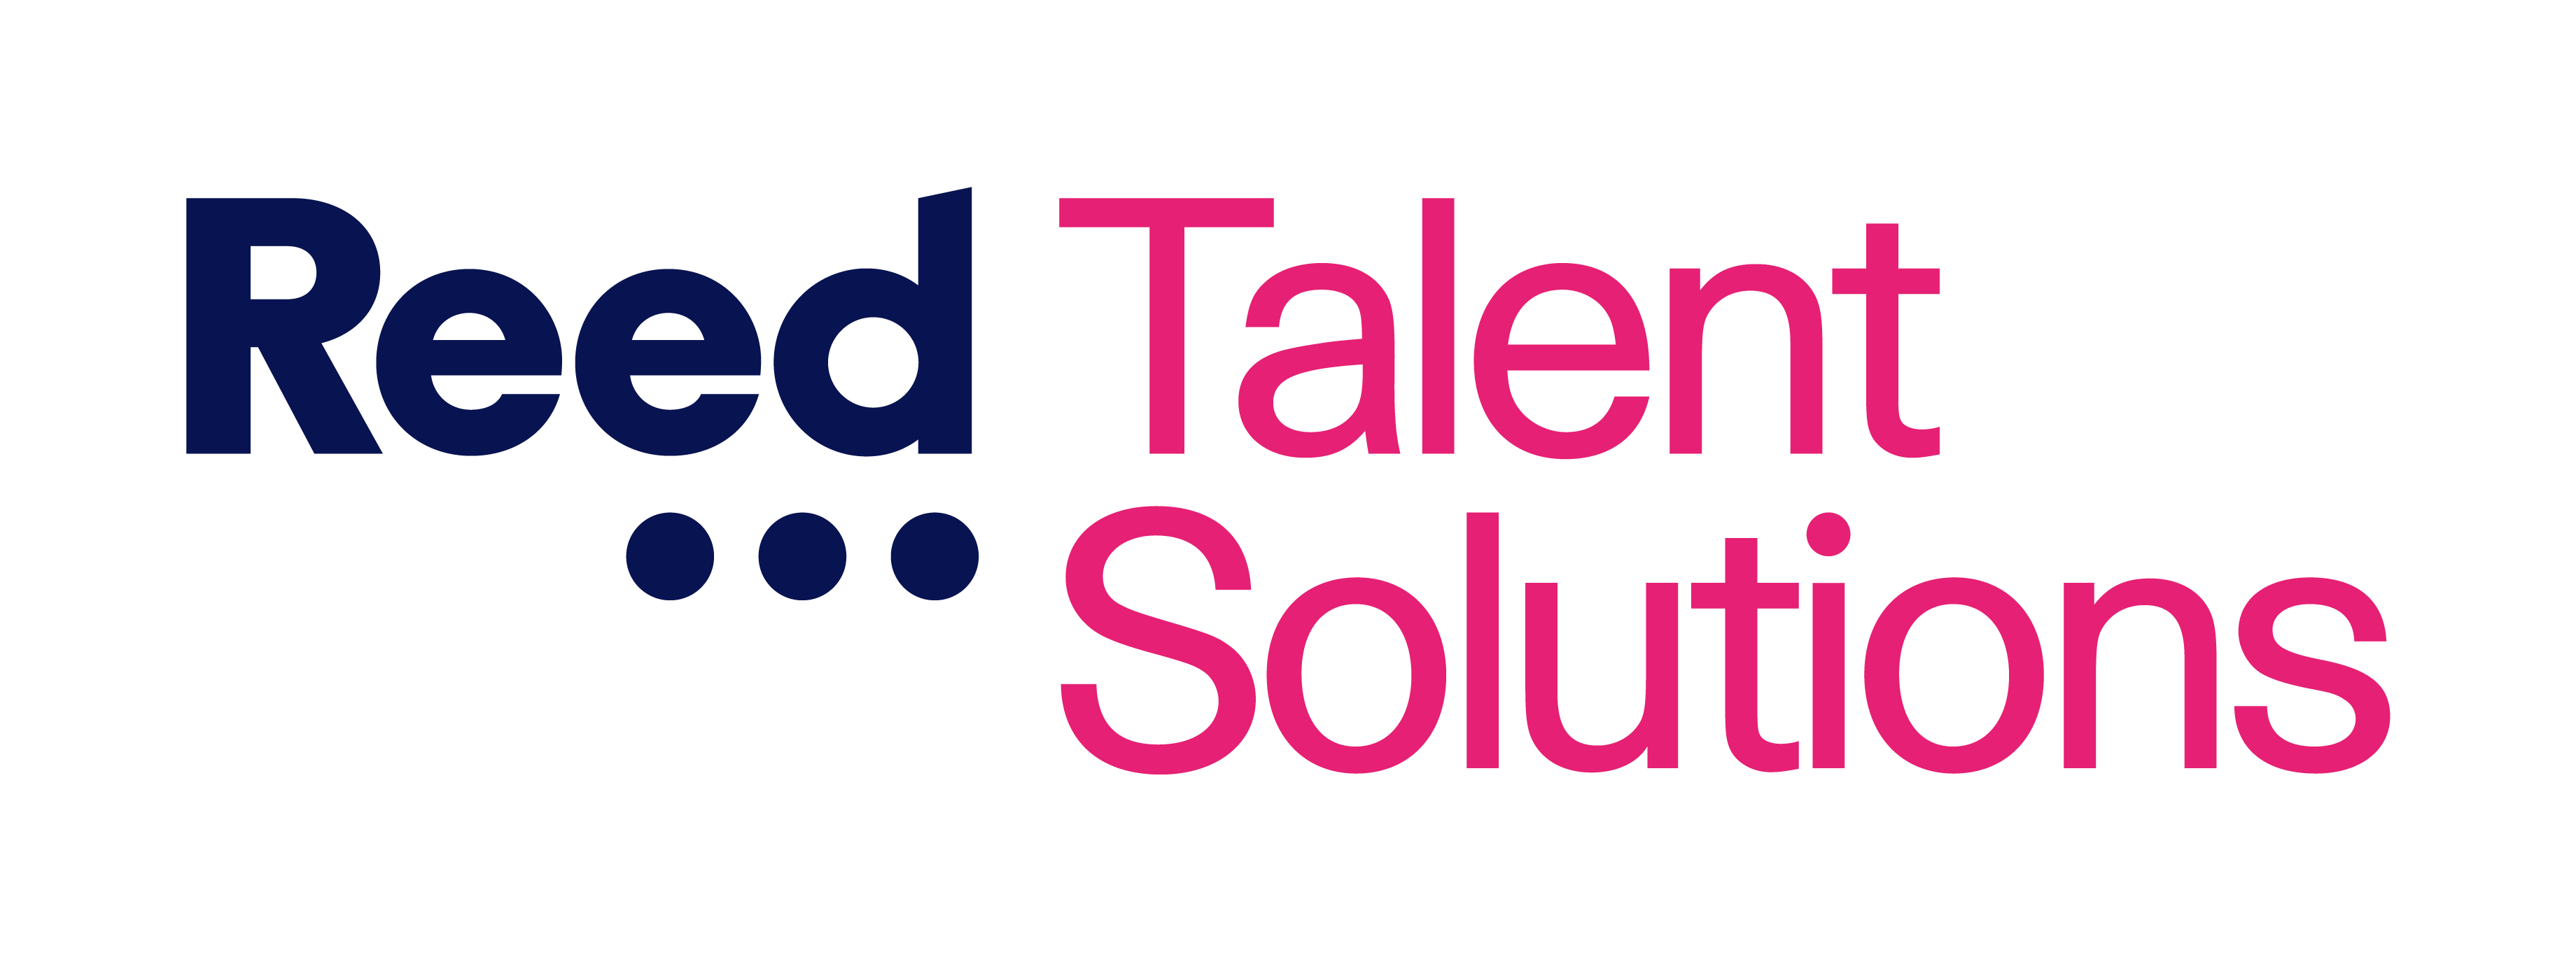 Reed Talent Solutions